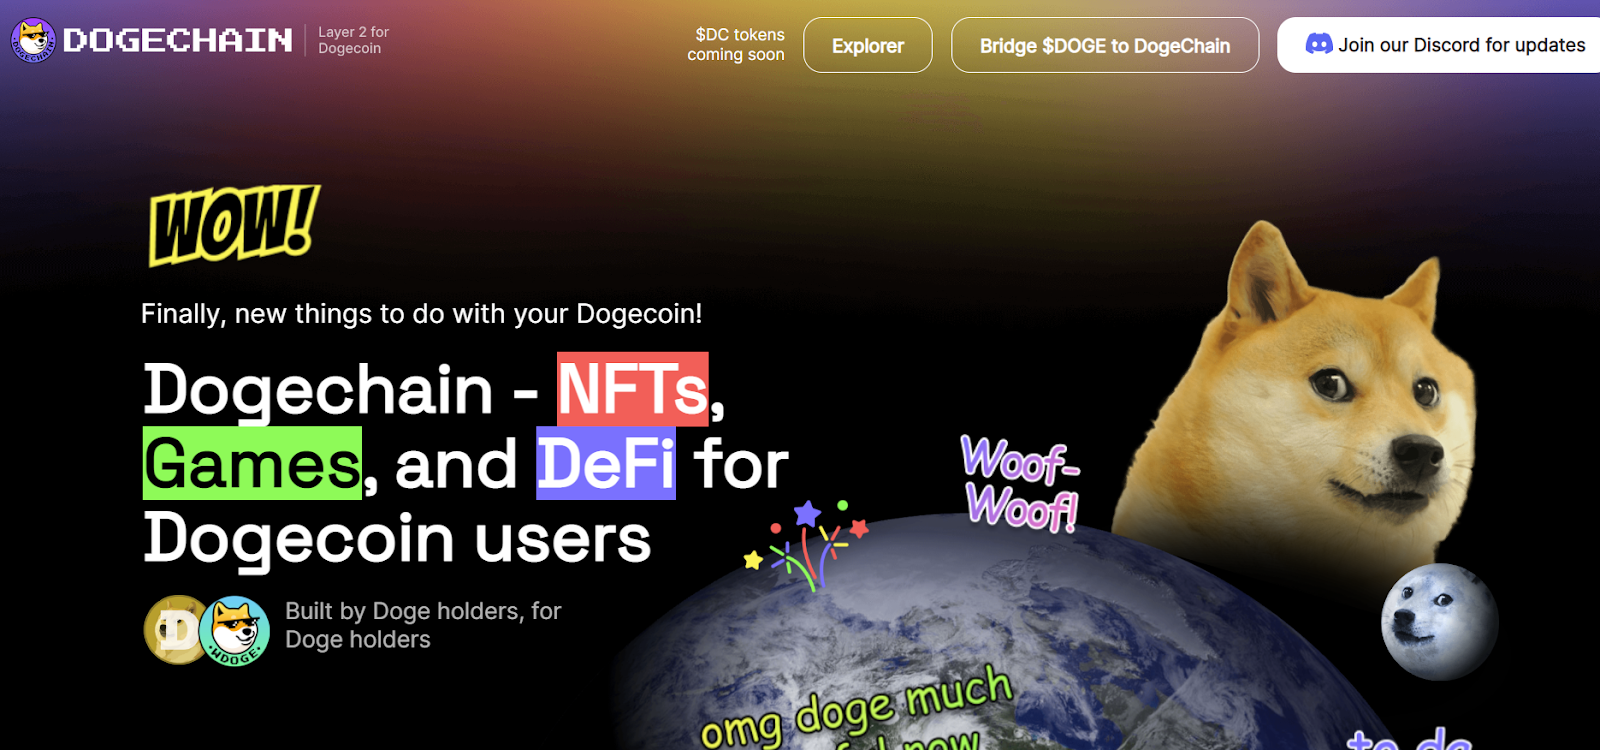 Screengrab from official Dogechain website.